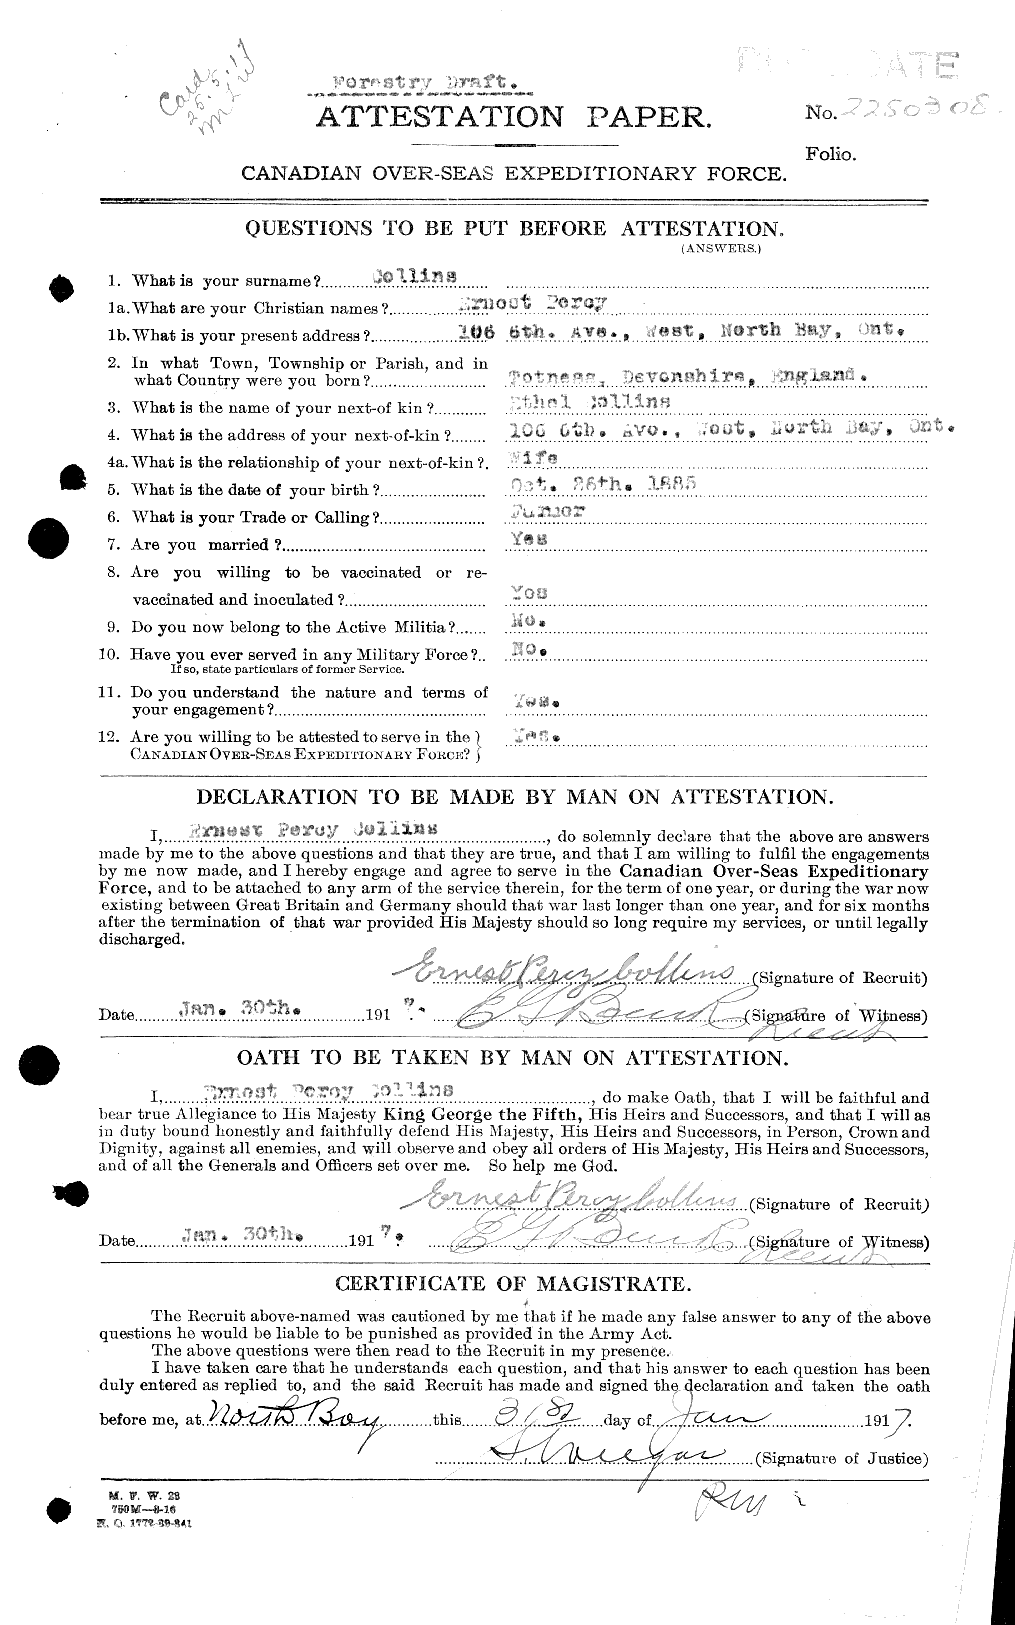 Personnel Records of the First World War - CEF 037773a